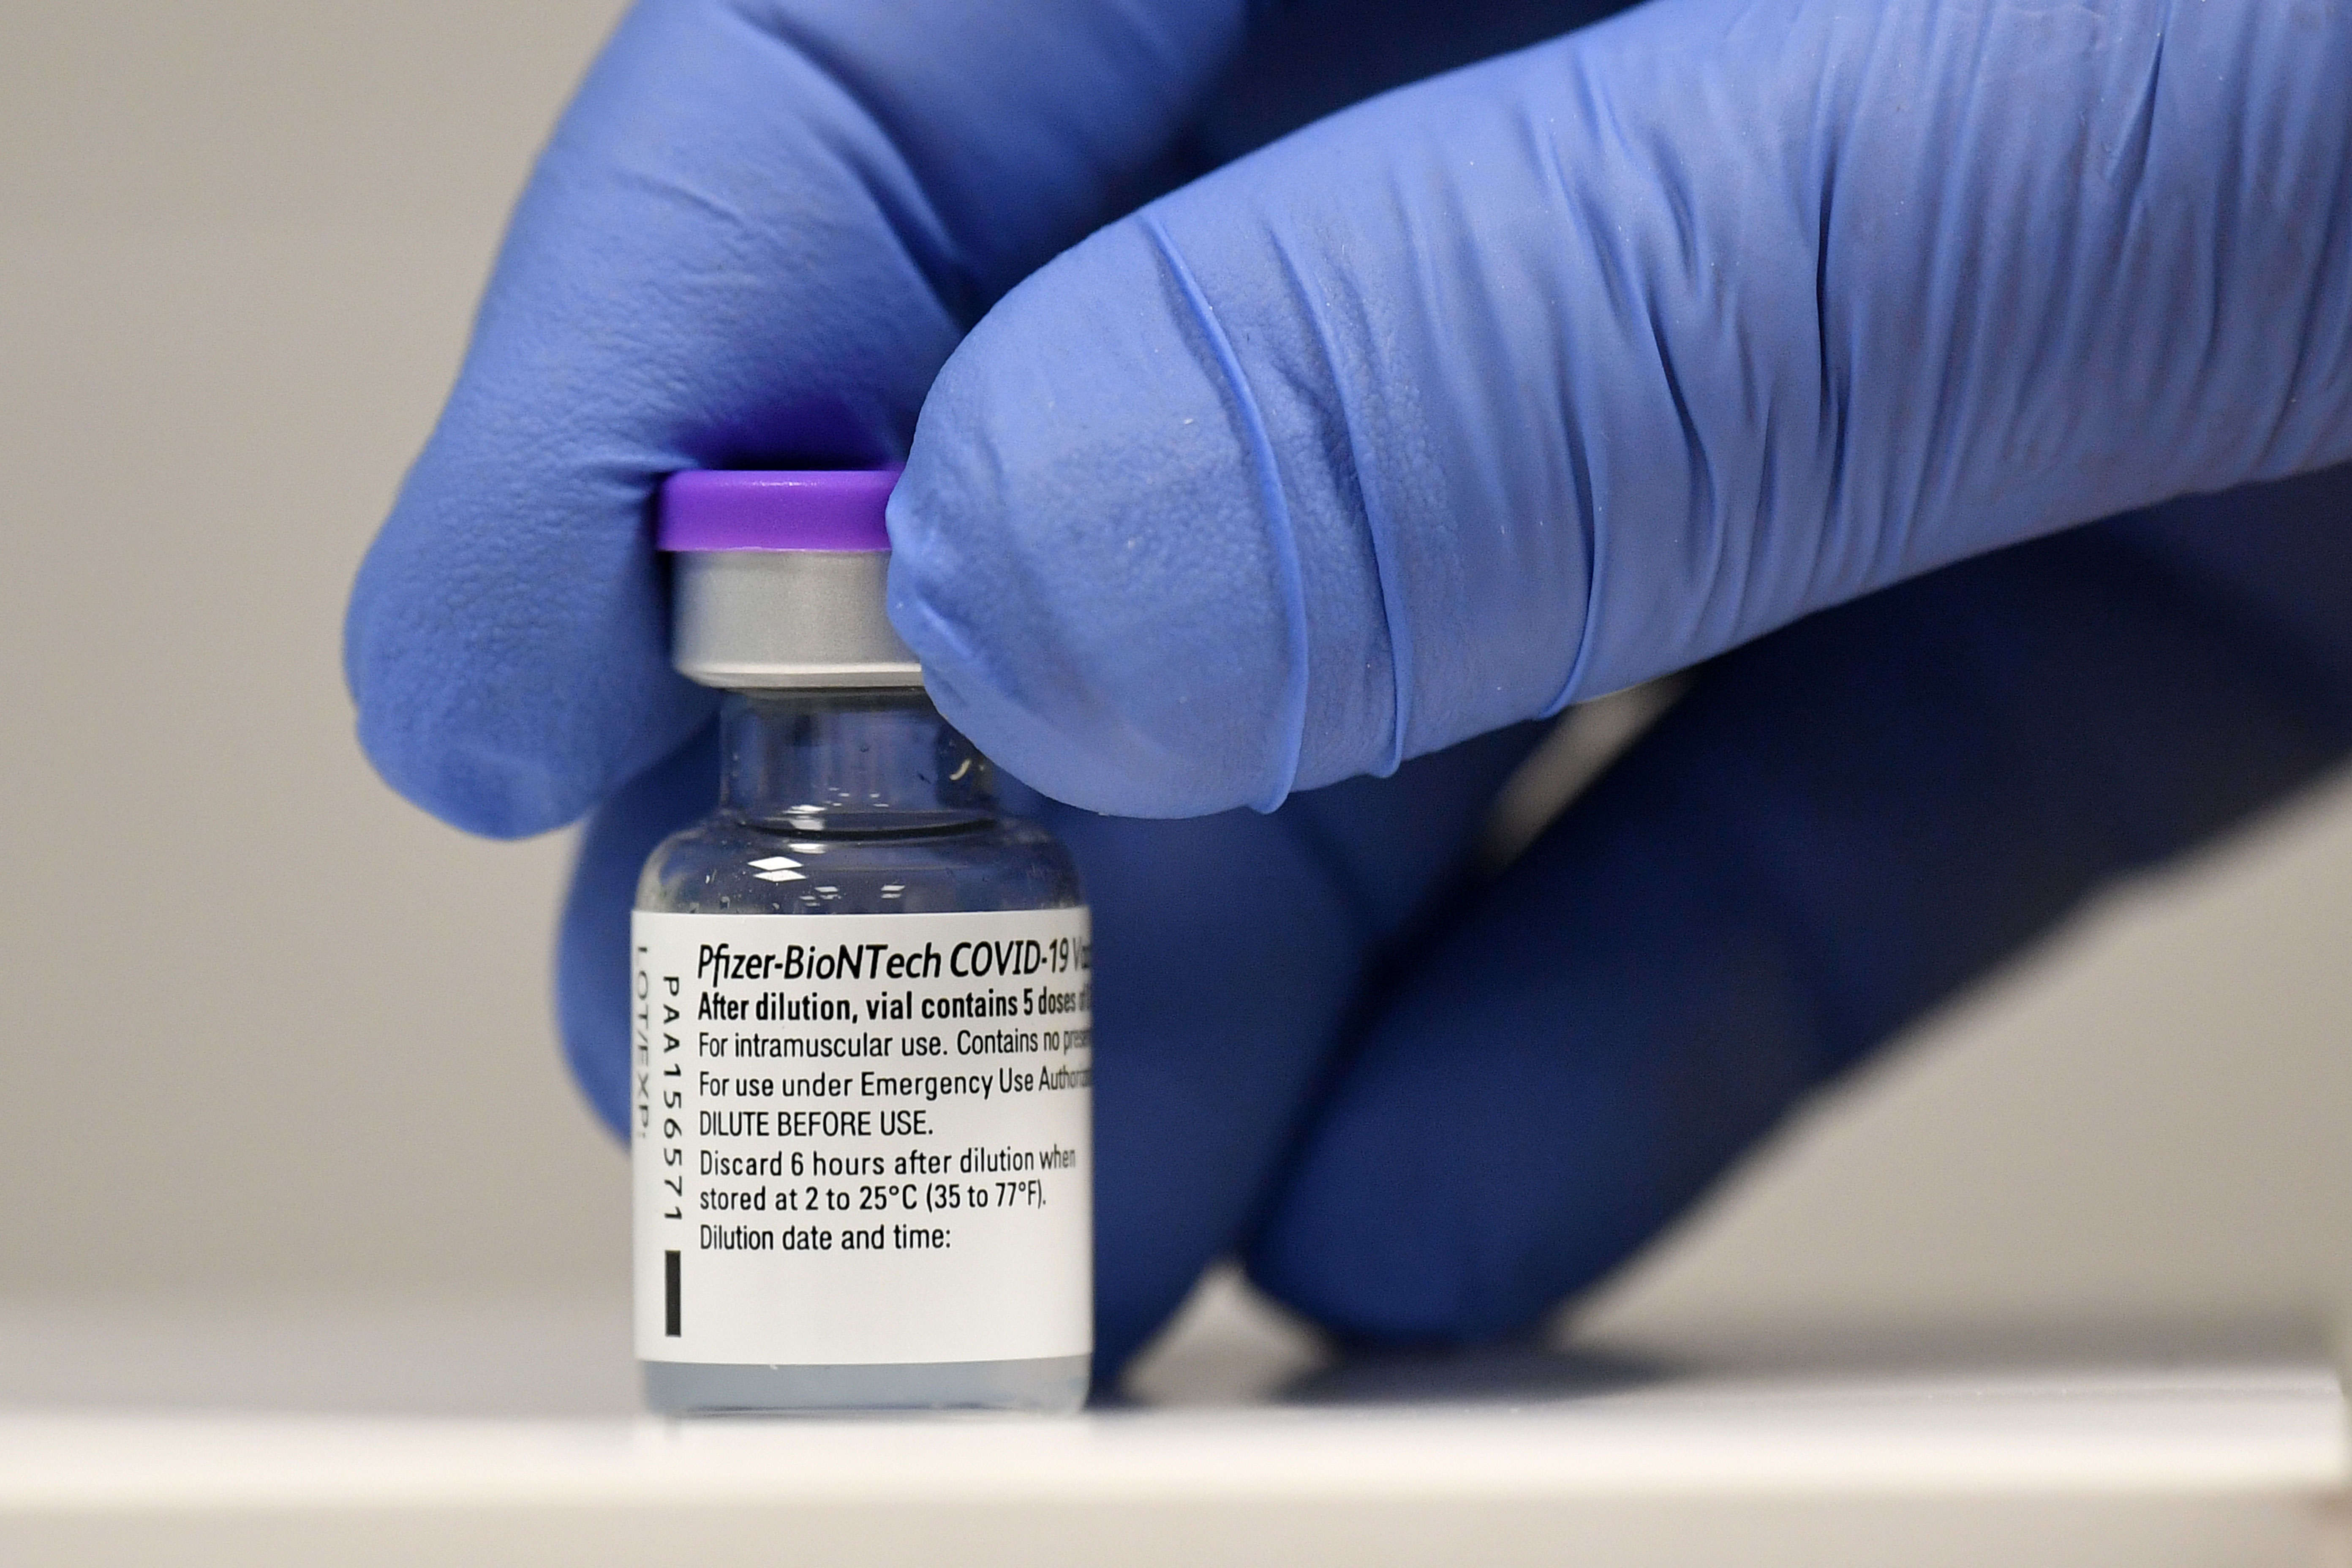 A phial of the Pfizer-BioNTech Covid-19 vaccine is pictured on December 8 in Cardiff, Wales.